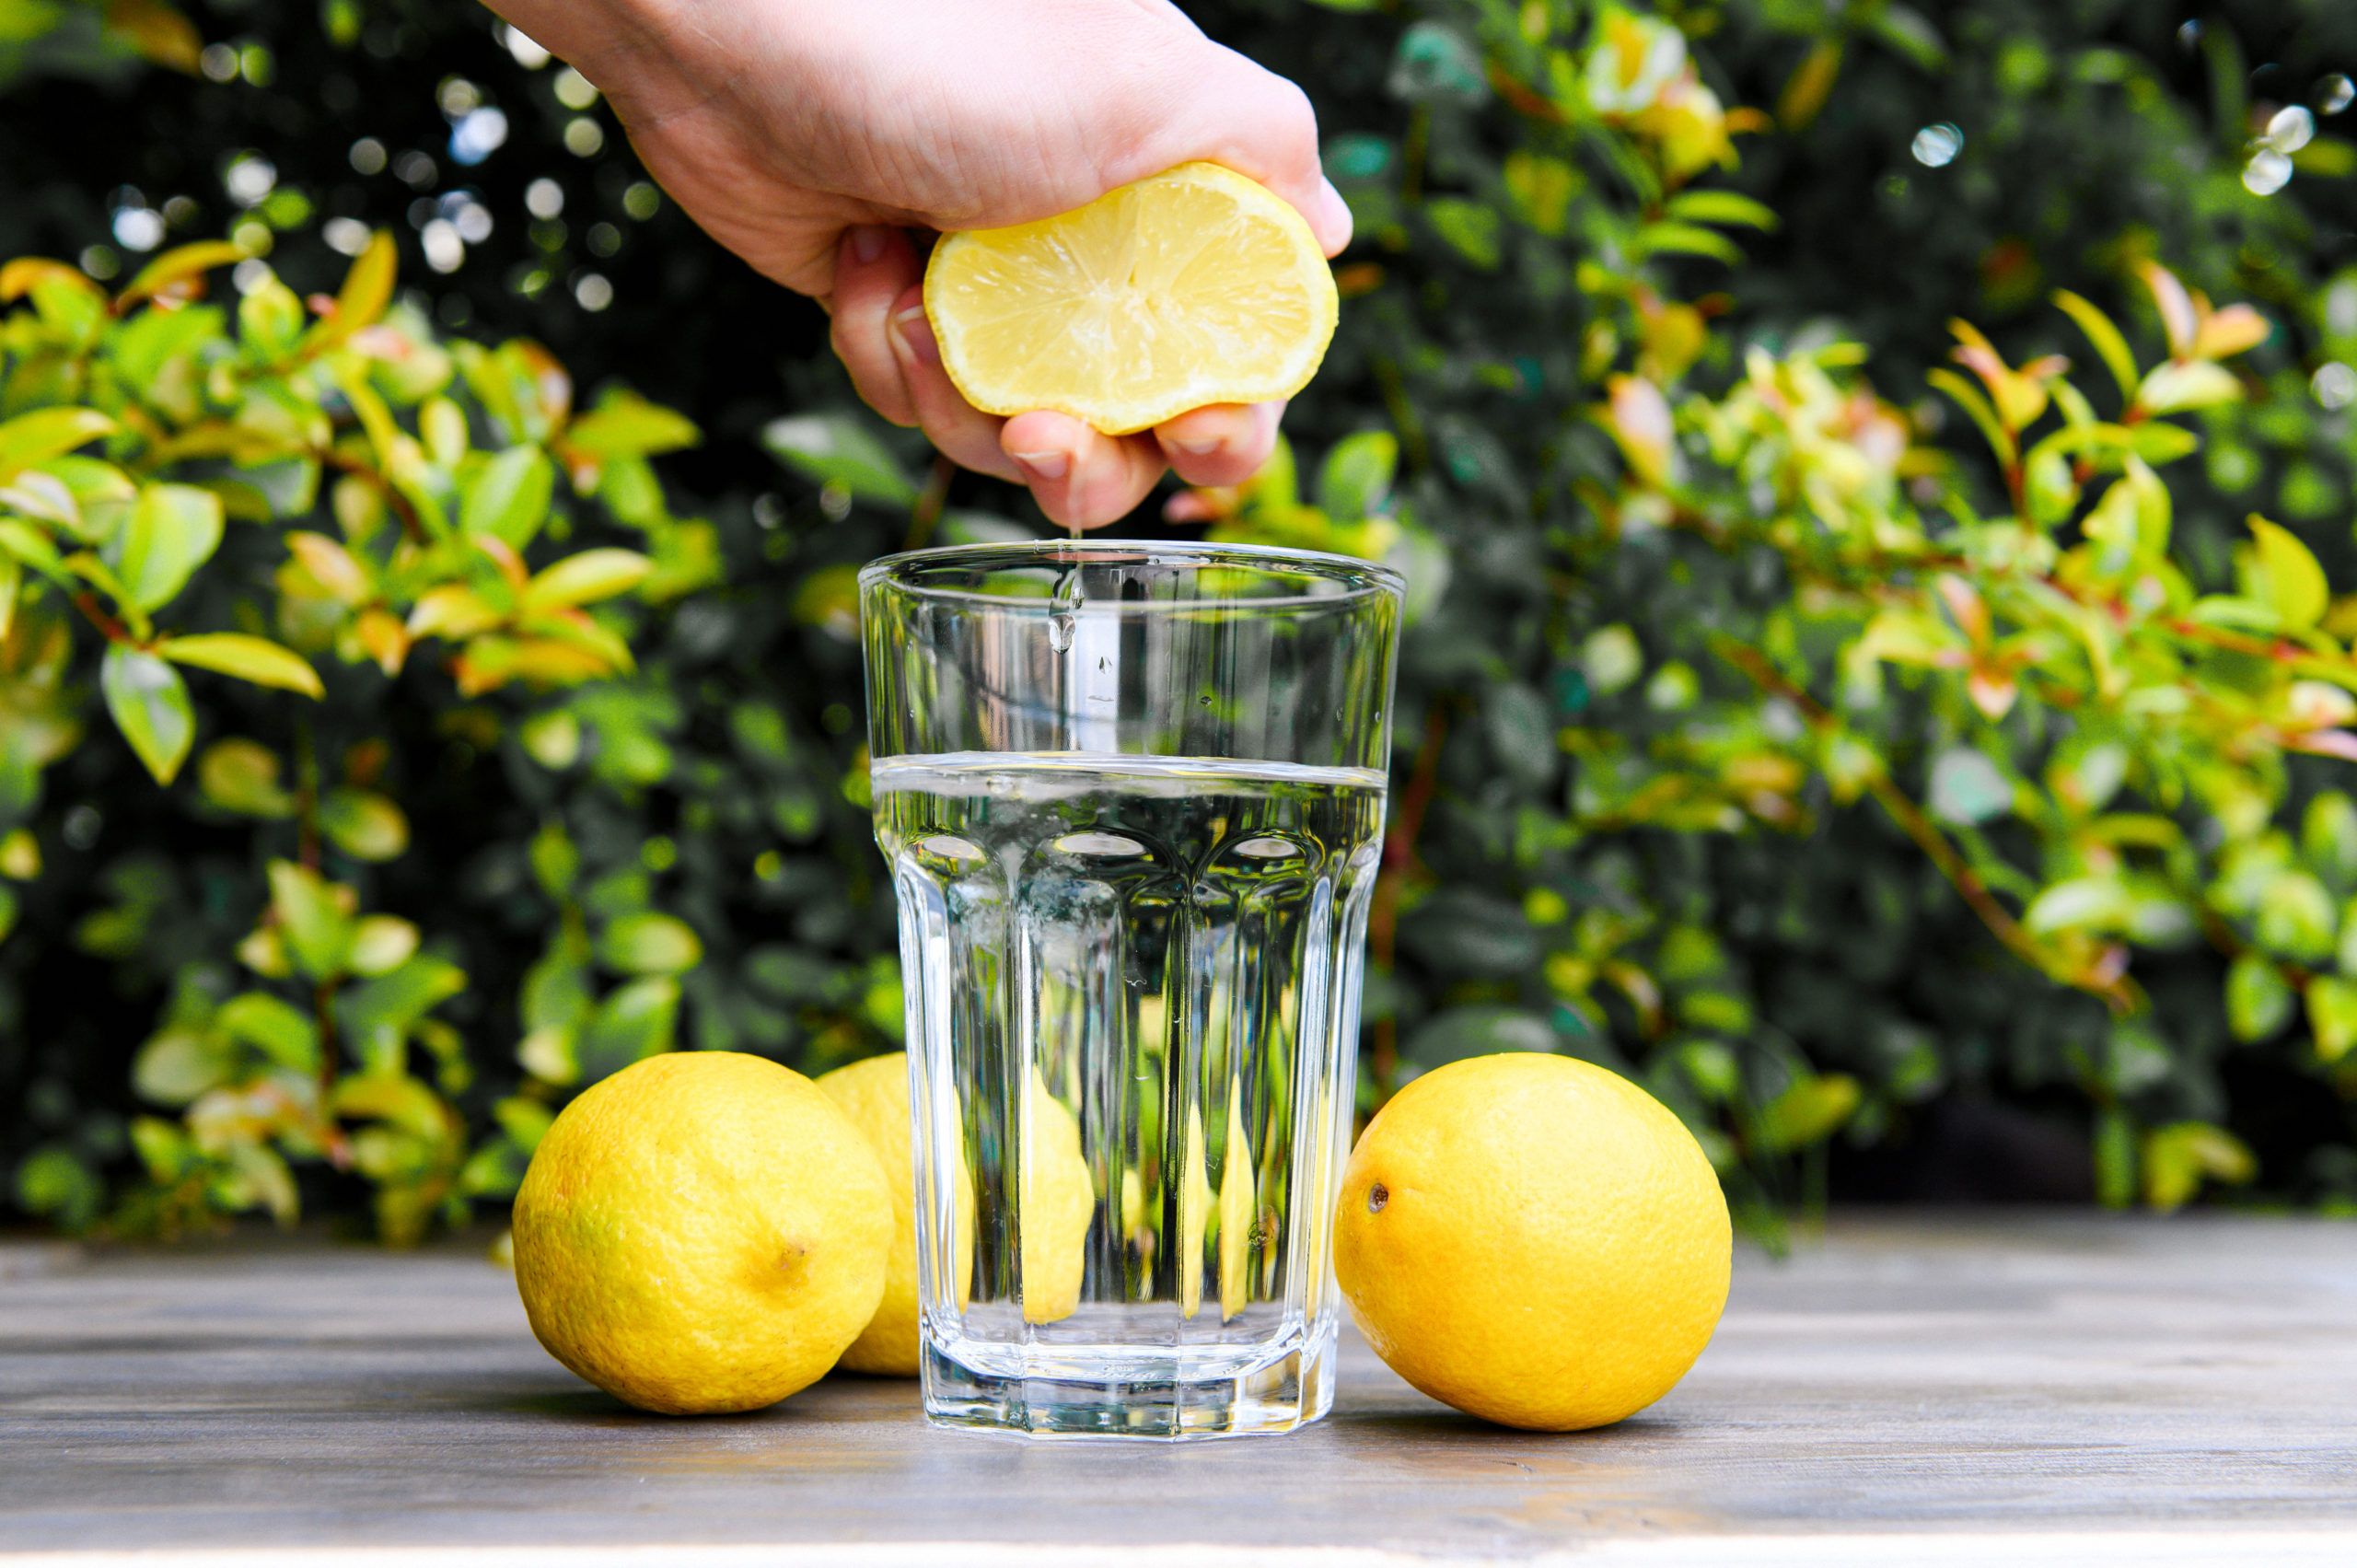 Squeezing,A,Lemon,Into,The,Water.,Cooking,Lemon,Water.